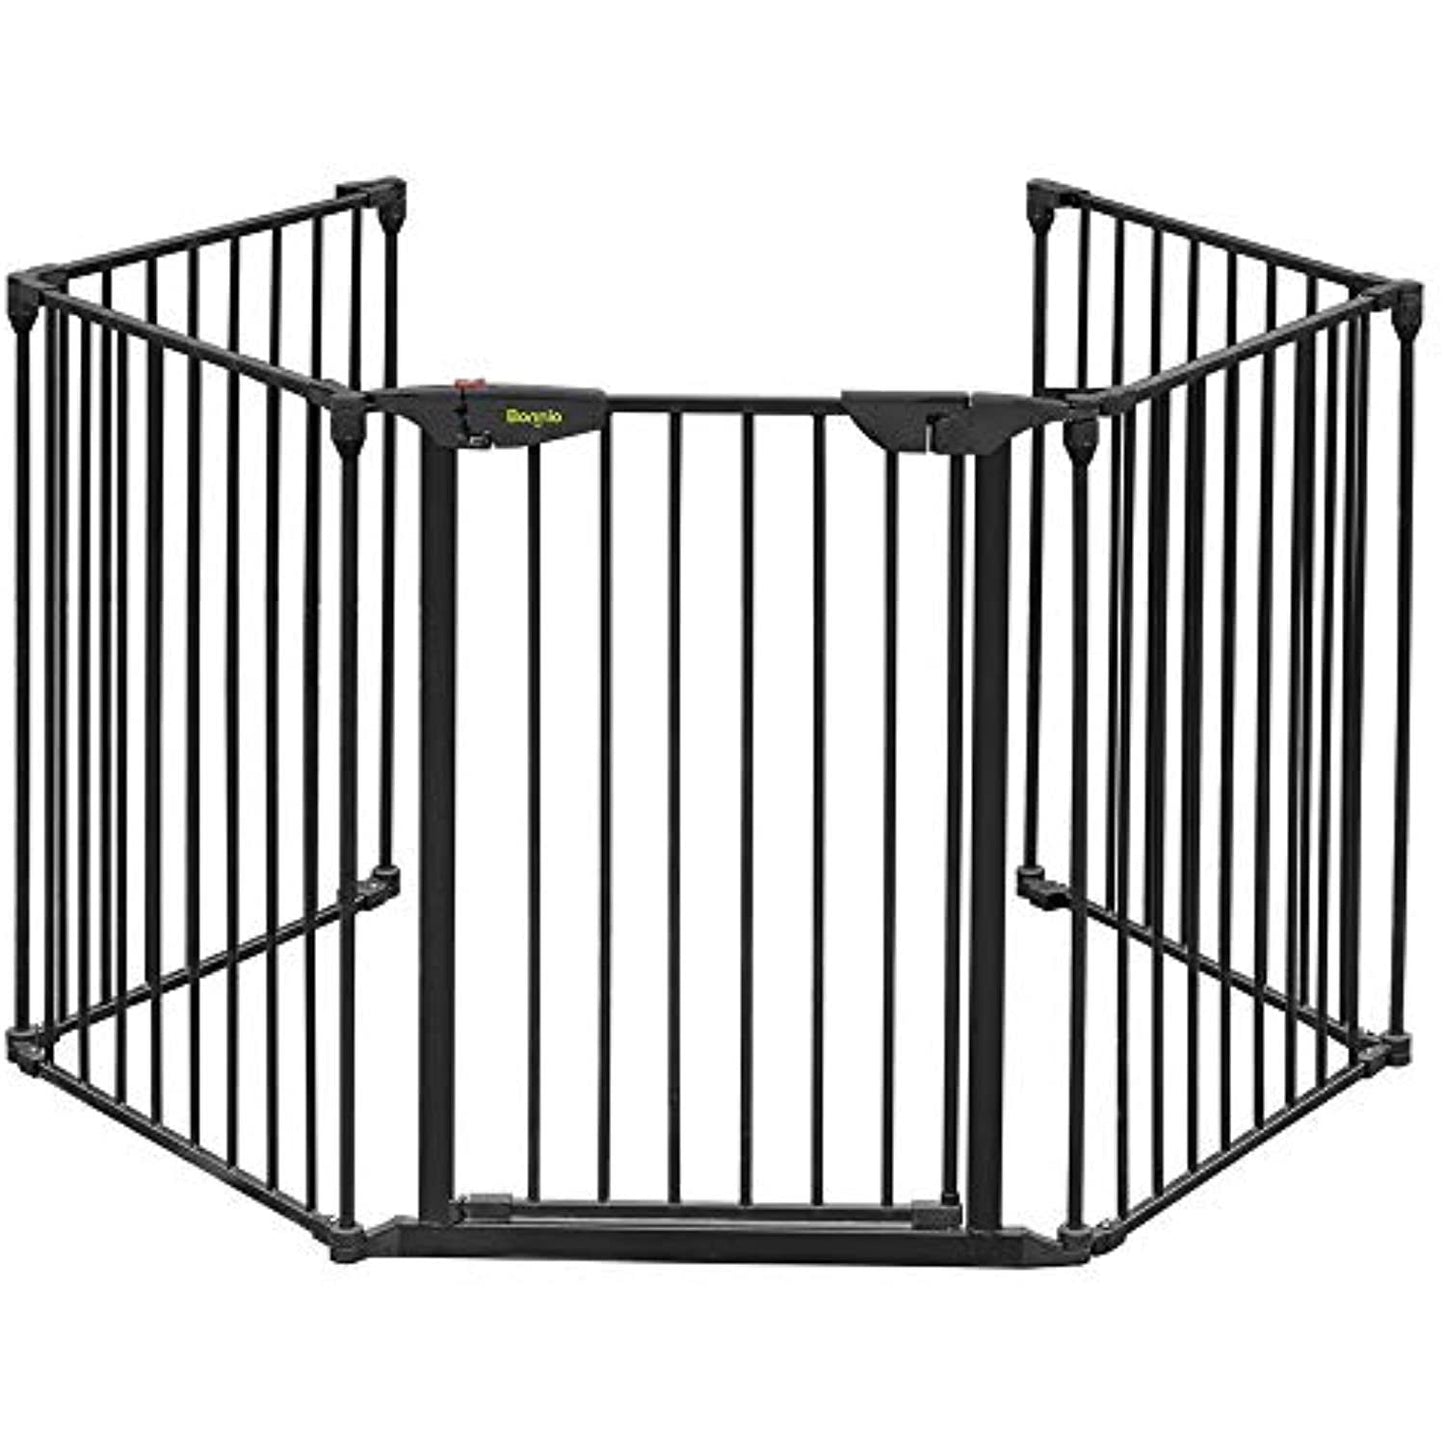 120.5-Inch Metal Fireplace Fence Guard 5-Panel Baby Safety Gate/Barrier/Play Yard With Door Christmas Tree Fence Hearth Gate For Kids/Pet